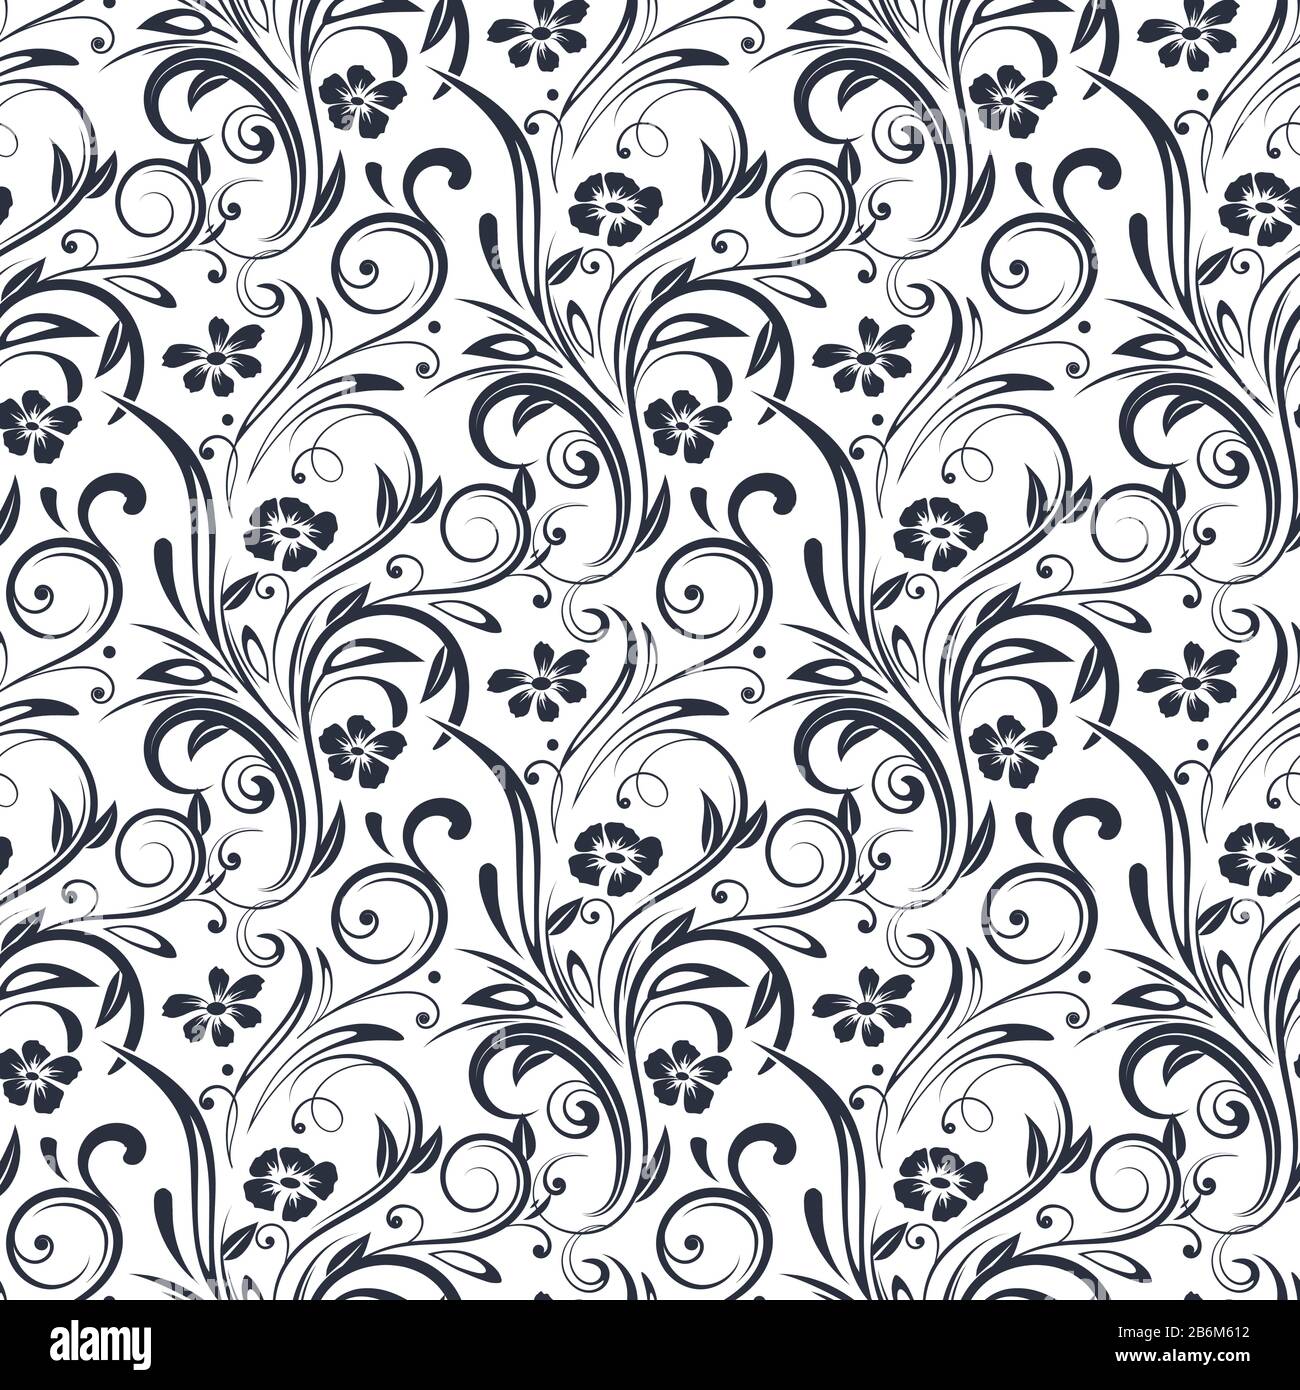 Black filigree floral pattern. Black and white seamless background Stock Vector